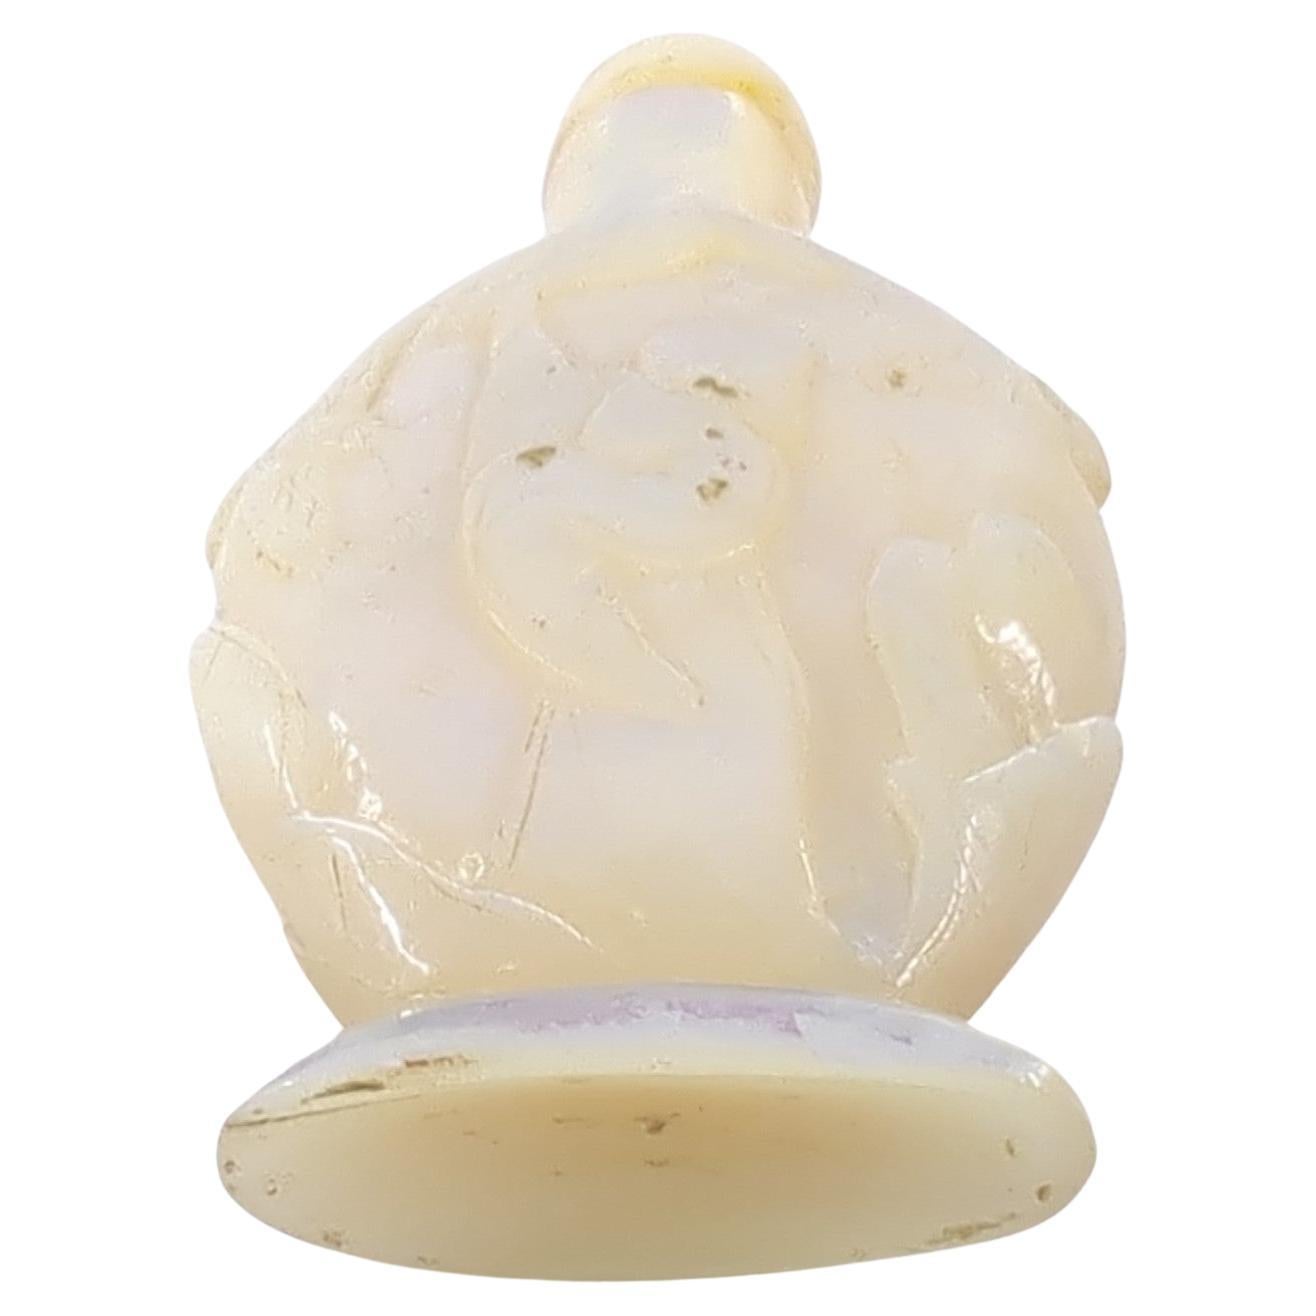 Antique Chinese Cameo Carved Mother-Of-Pearl MOP Snuff Bottle PRoC 5/6/7 period For Sale 3